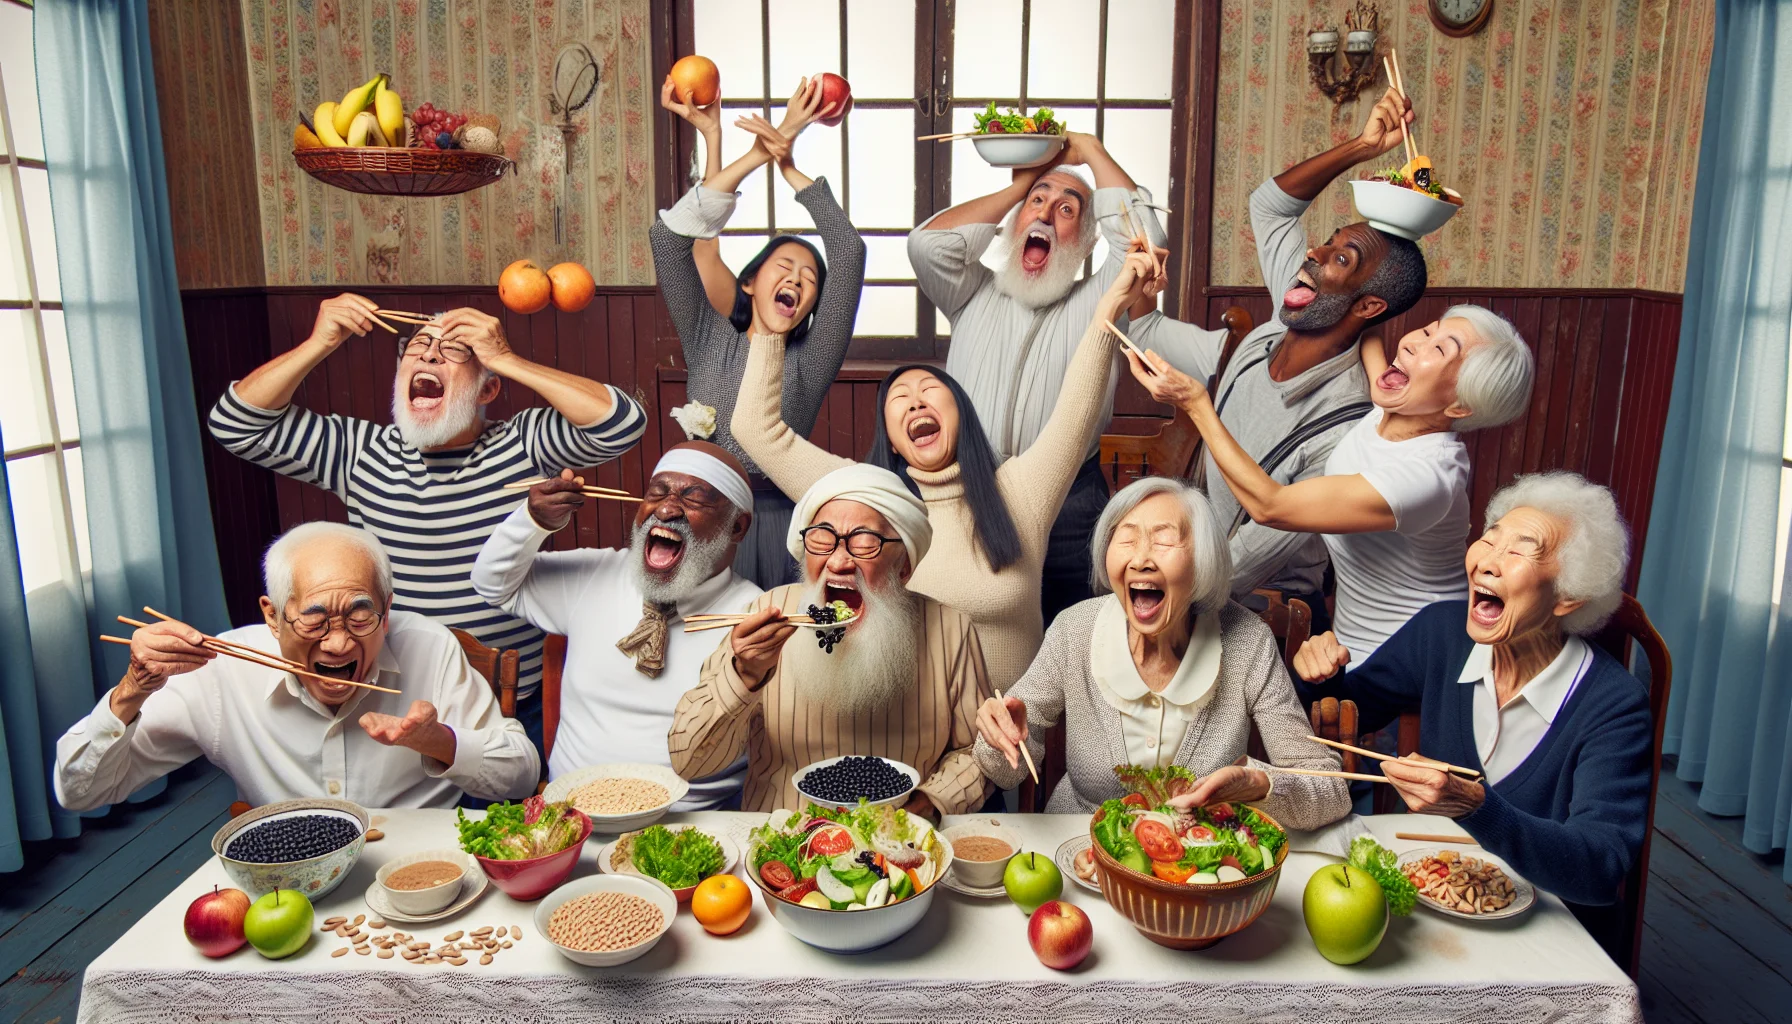 Picture a hilarious scene in an old fashioned dining room filled with elderly individuals from various descents such as Hispanic, Black, Caucasian, and Middle-Eastern. They are all joyously participating in a peculiar 'healthy eating competition'. Their food choices highlight nutrient-rich, high-fiber foods preferred in pregnancy, like fresh fruits, leafy greens, whole grains and legumes. One gentleman, a South Asian man, is earnestly trying to use chopsticks for black beans, causing much amusement. A white woman is balancing an extra-large bowl of salad on her head, and a Black man is wildly juggling apples. Their laughter and cheerful competitiveness fills the air, turning the concept of dieting and healthy eating into a comical, yet insightful event.